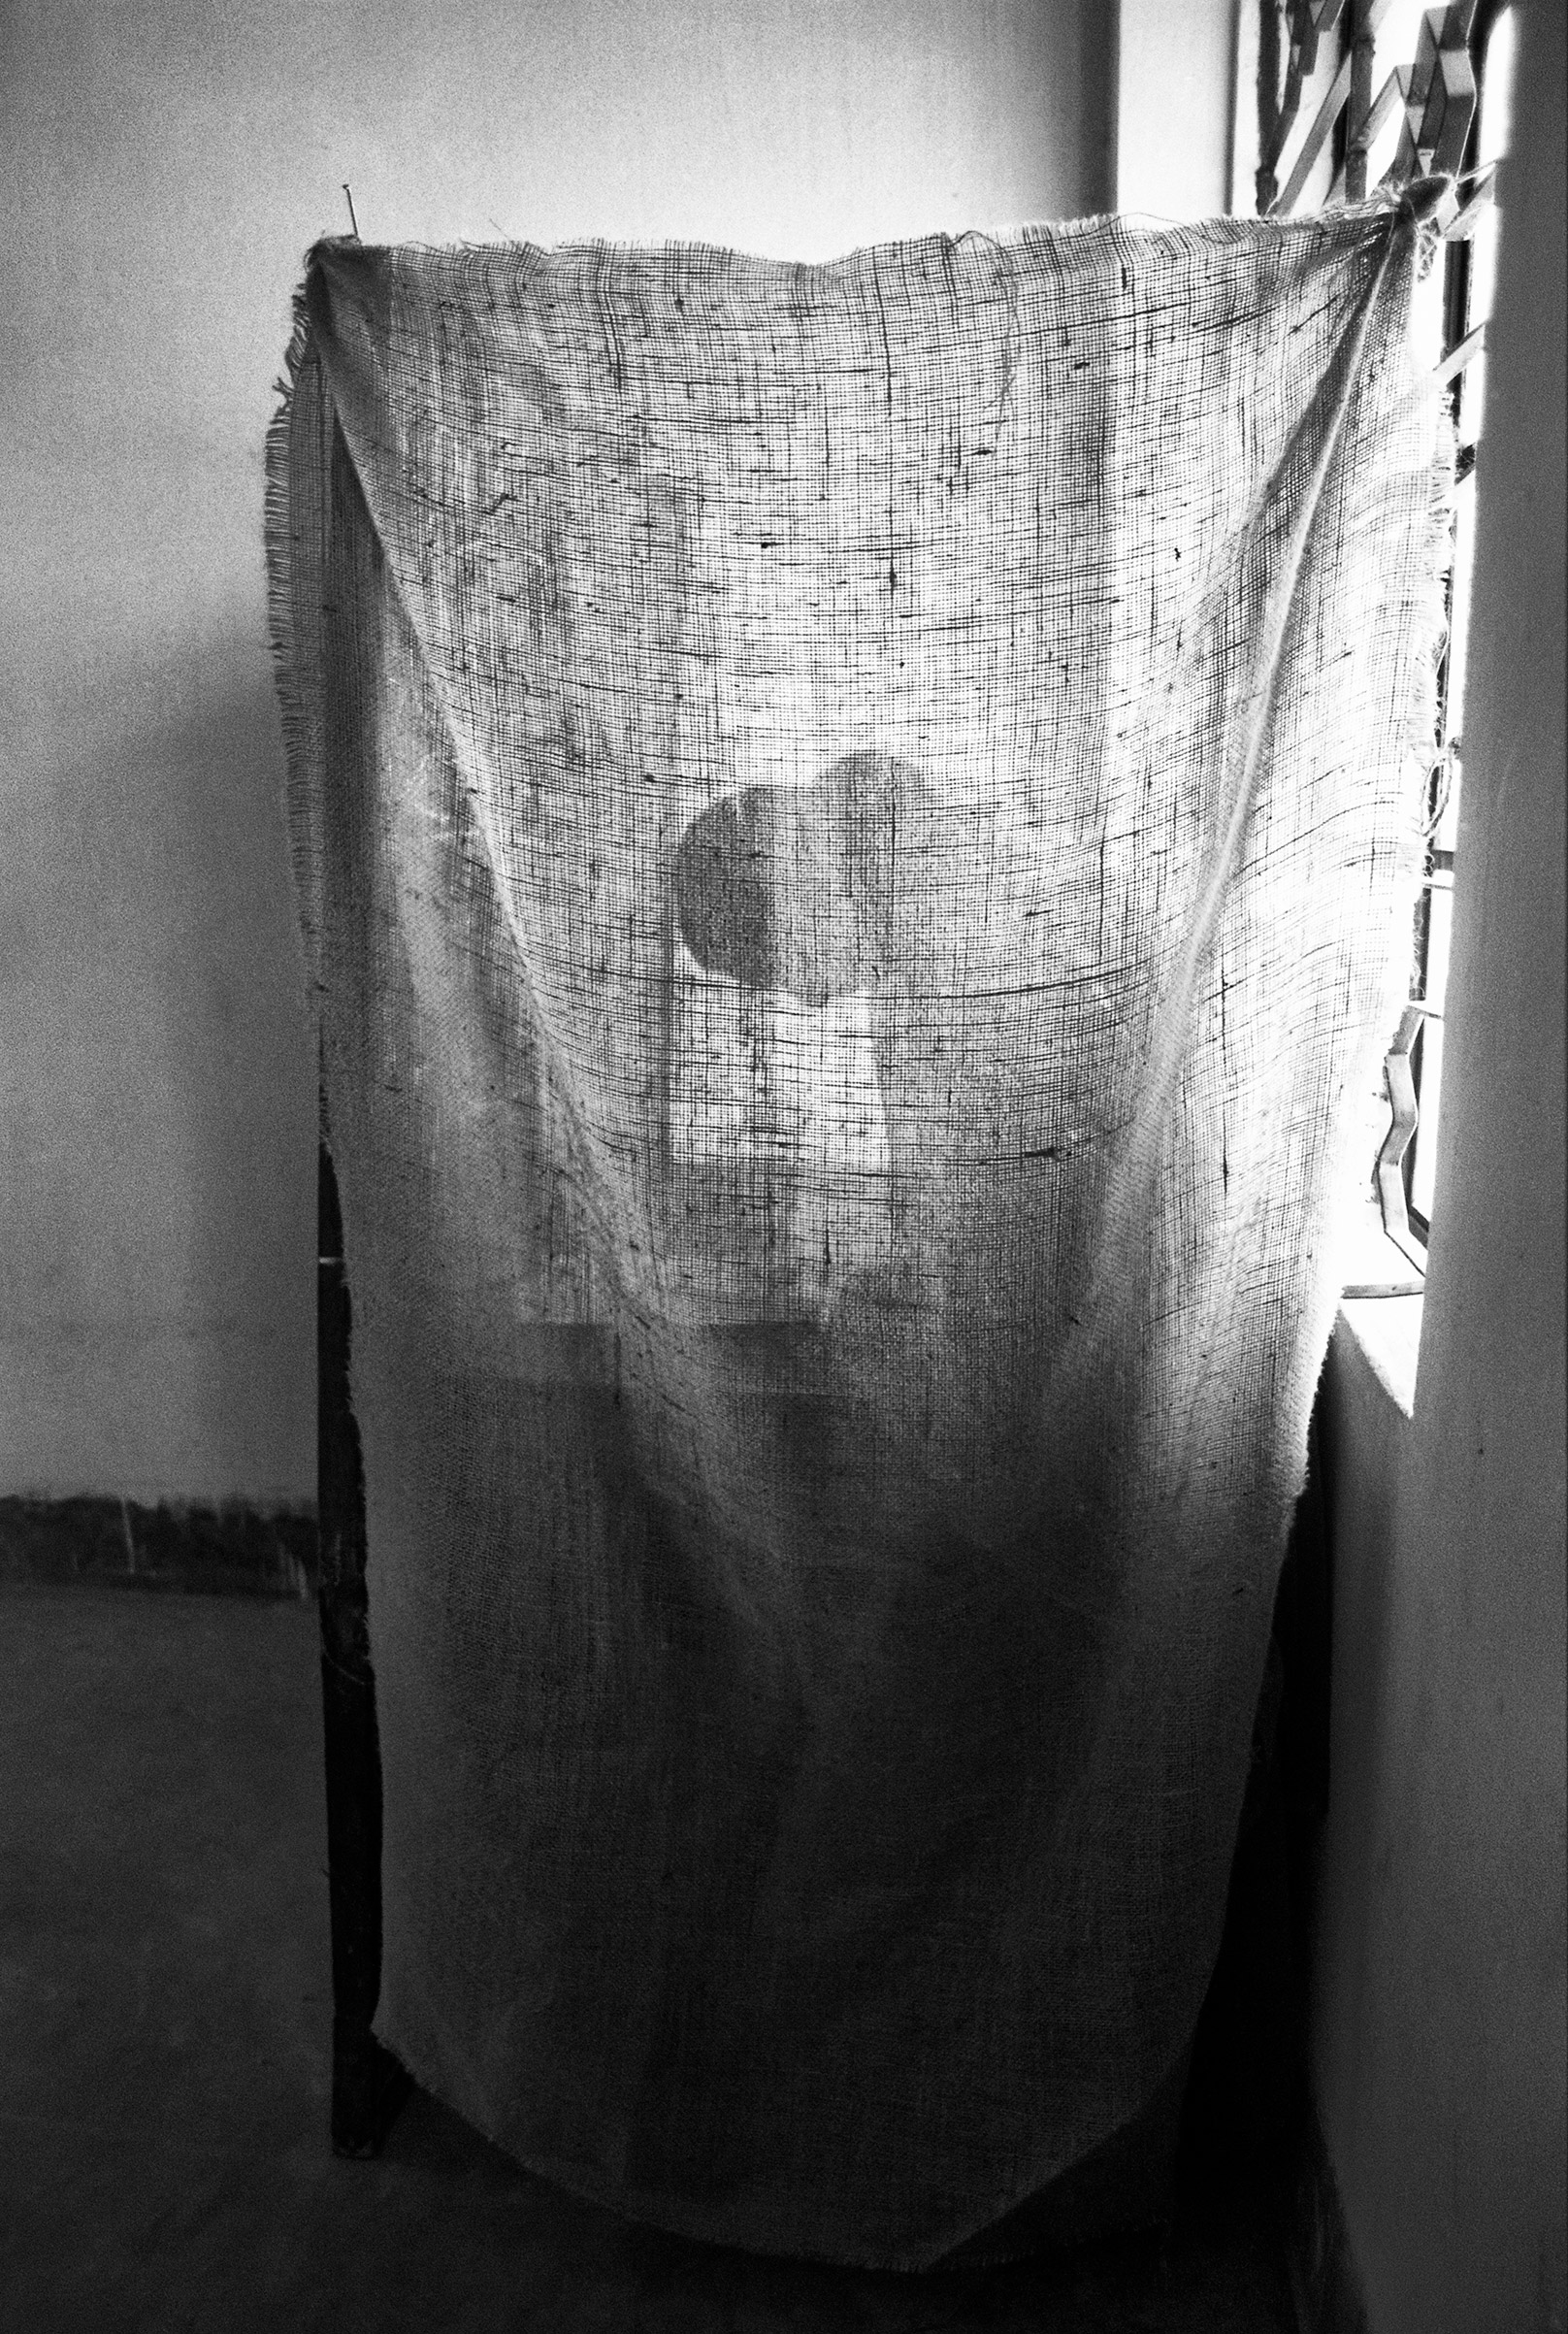 A woman in Lalmatia casts her vote behind a makeshift screen after the removal of Ershad, during the first free and fair election in Bangladesh in 1991. (Shahidul Alam—Drik)